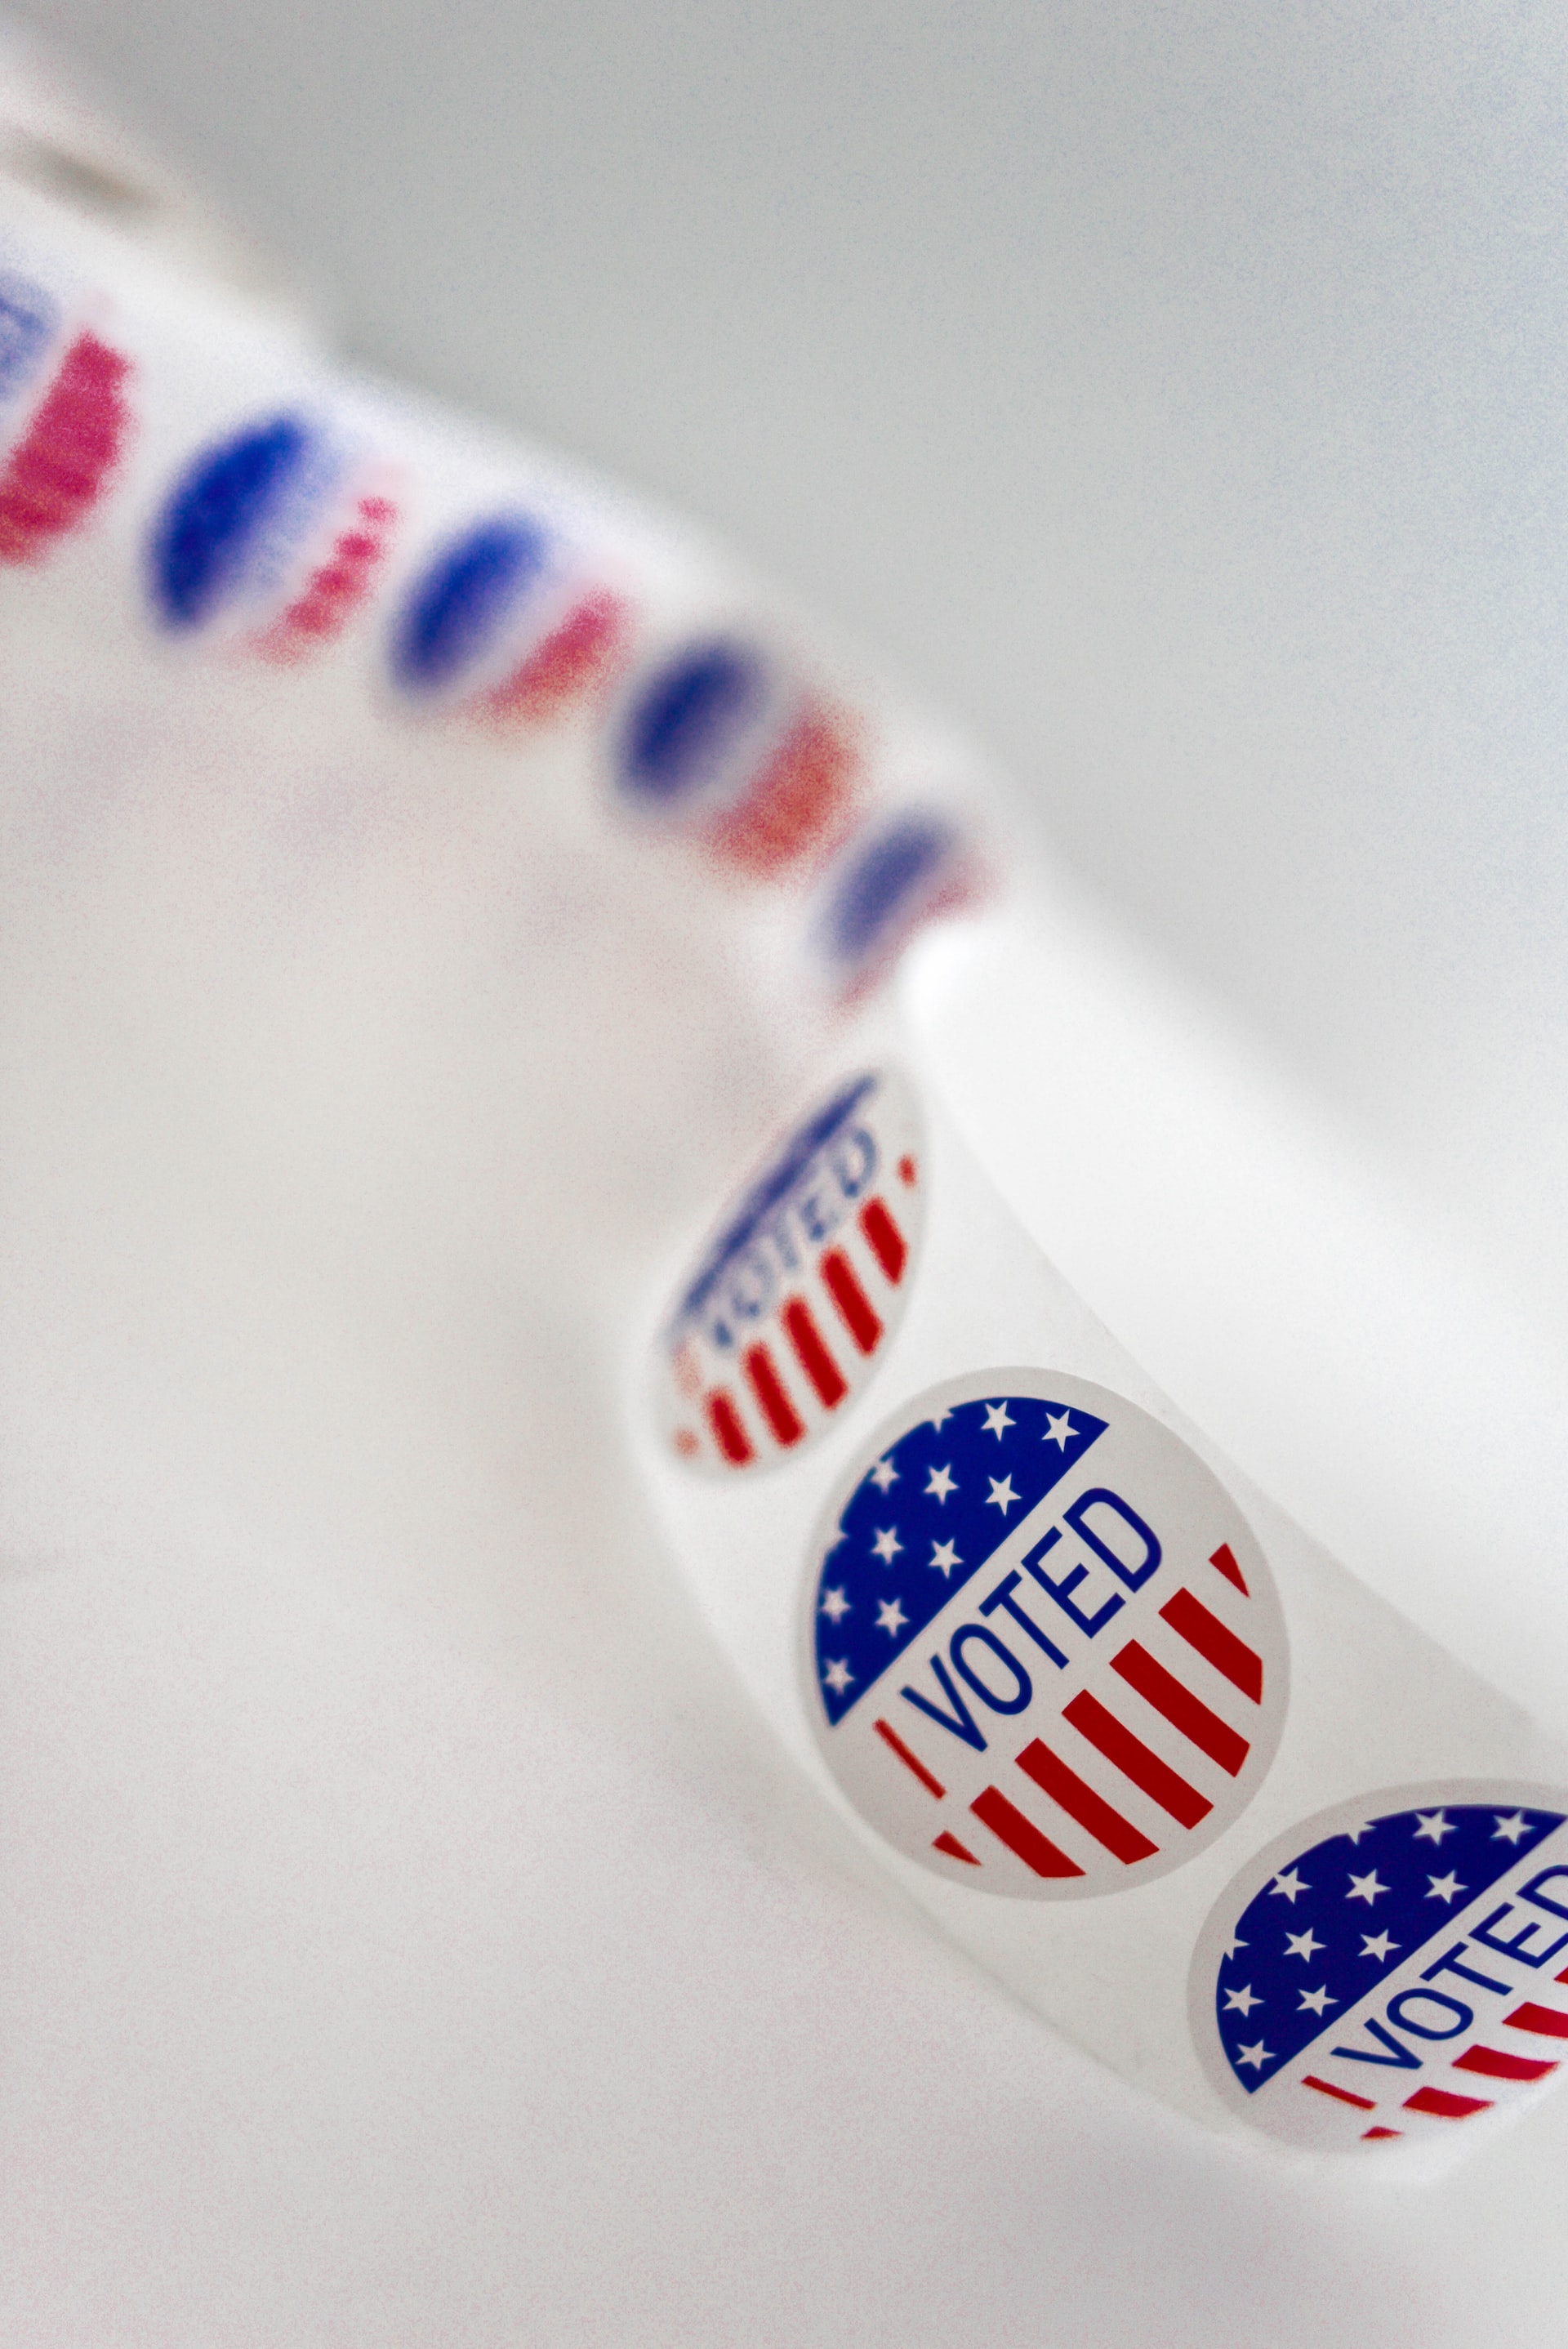 How To Reach More Voters With The Best Templates For Political Campaigns